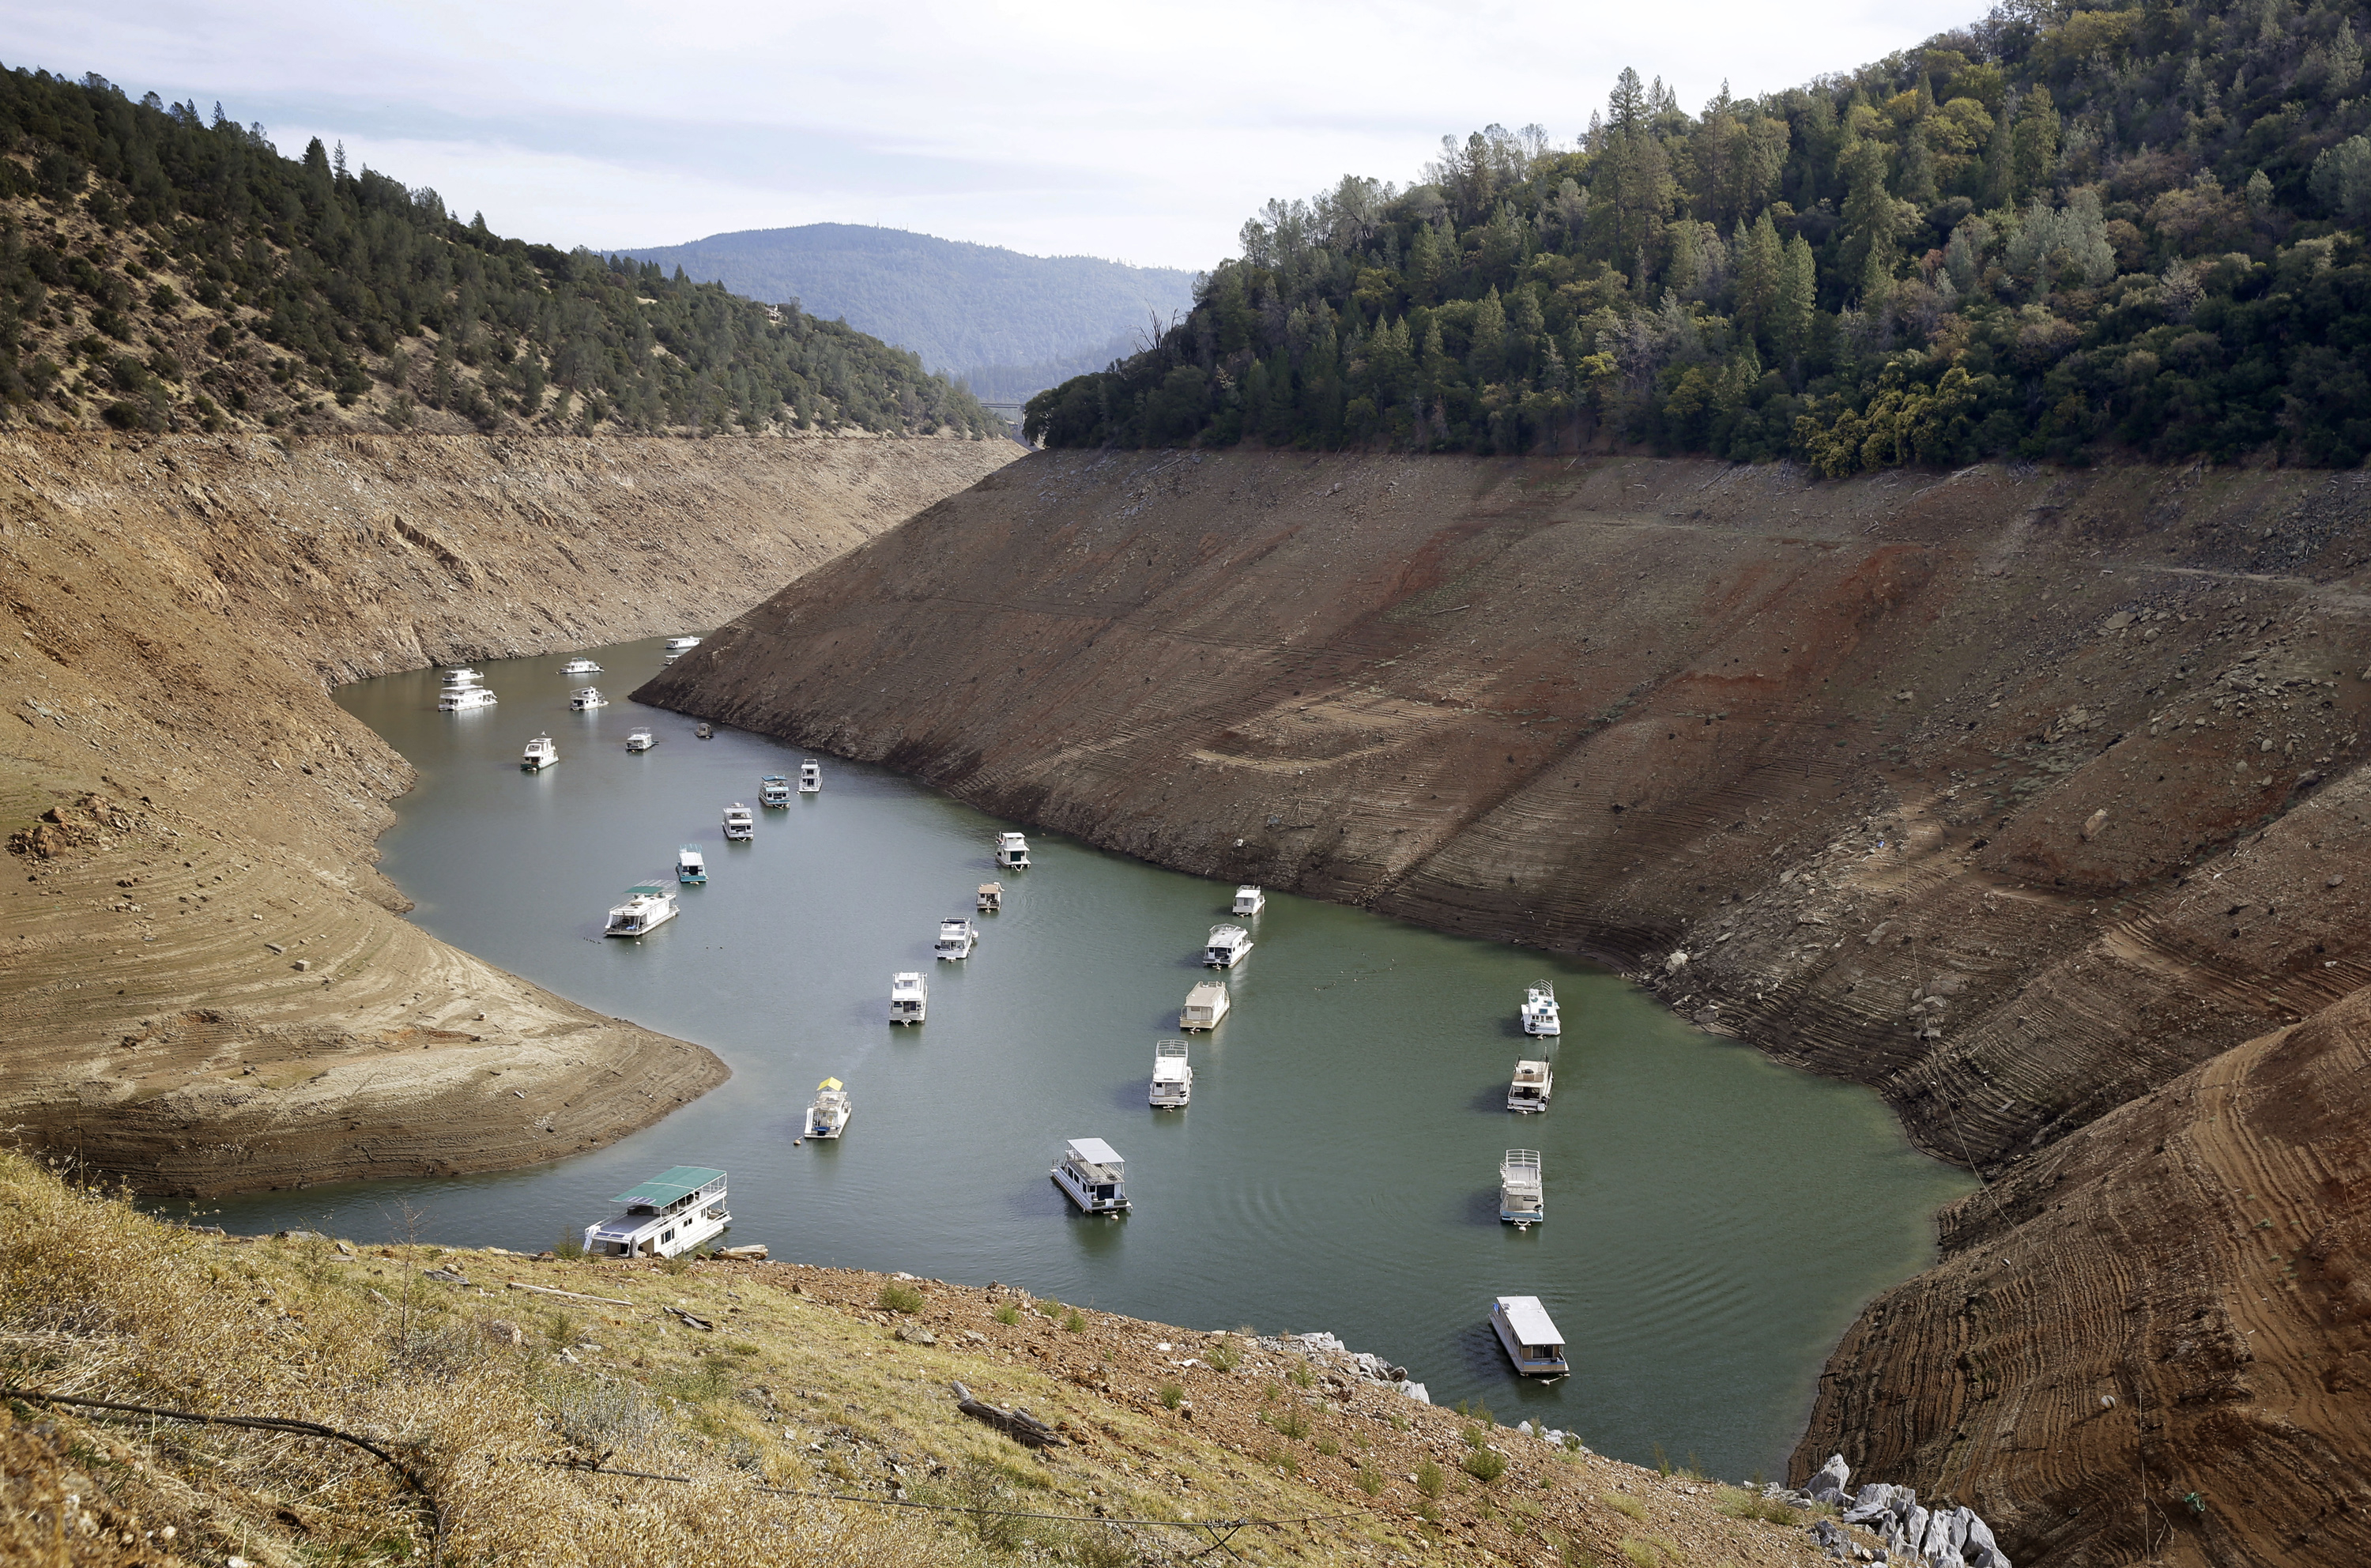 Houseboats float in the drought-lowered waters of Oroville Lake near Oroville, Calif., Oct. 30, 2014. Gov. Jerry Brown on April 1, 2015, ordered sweeping and unprecedented measures to save water in California. (Rich Pedroncelli—AP)